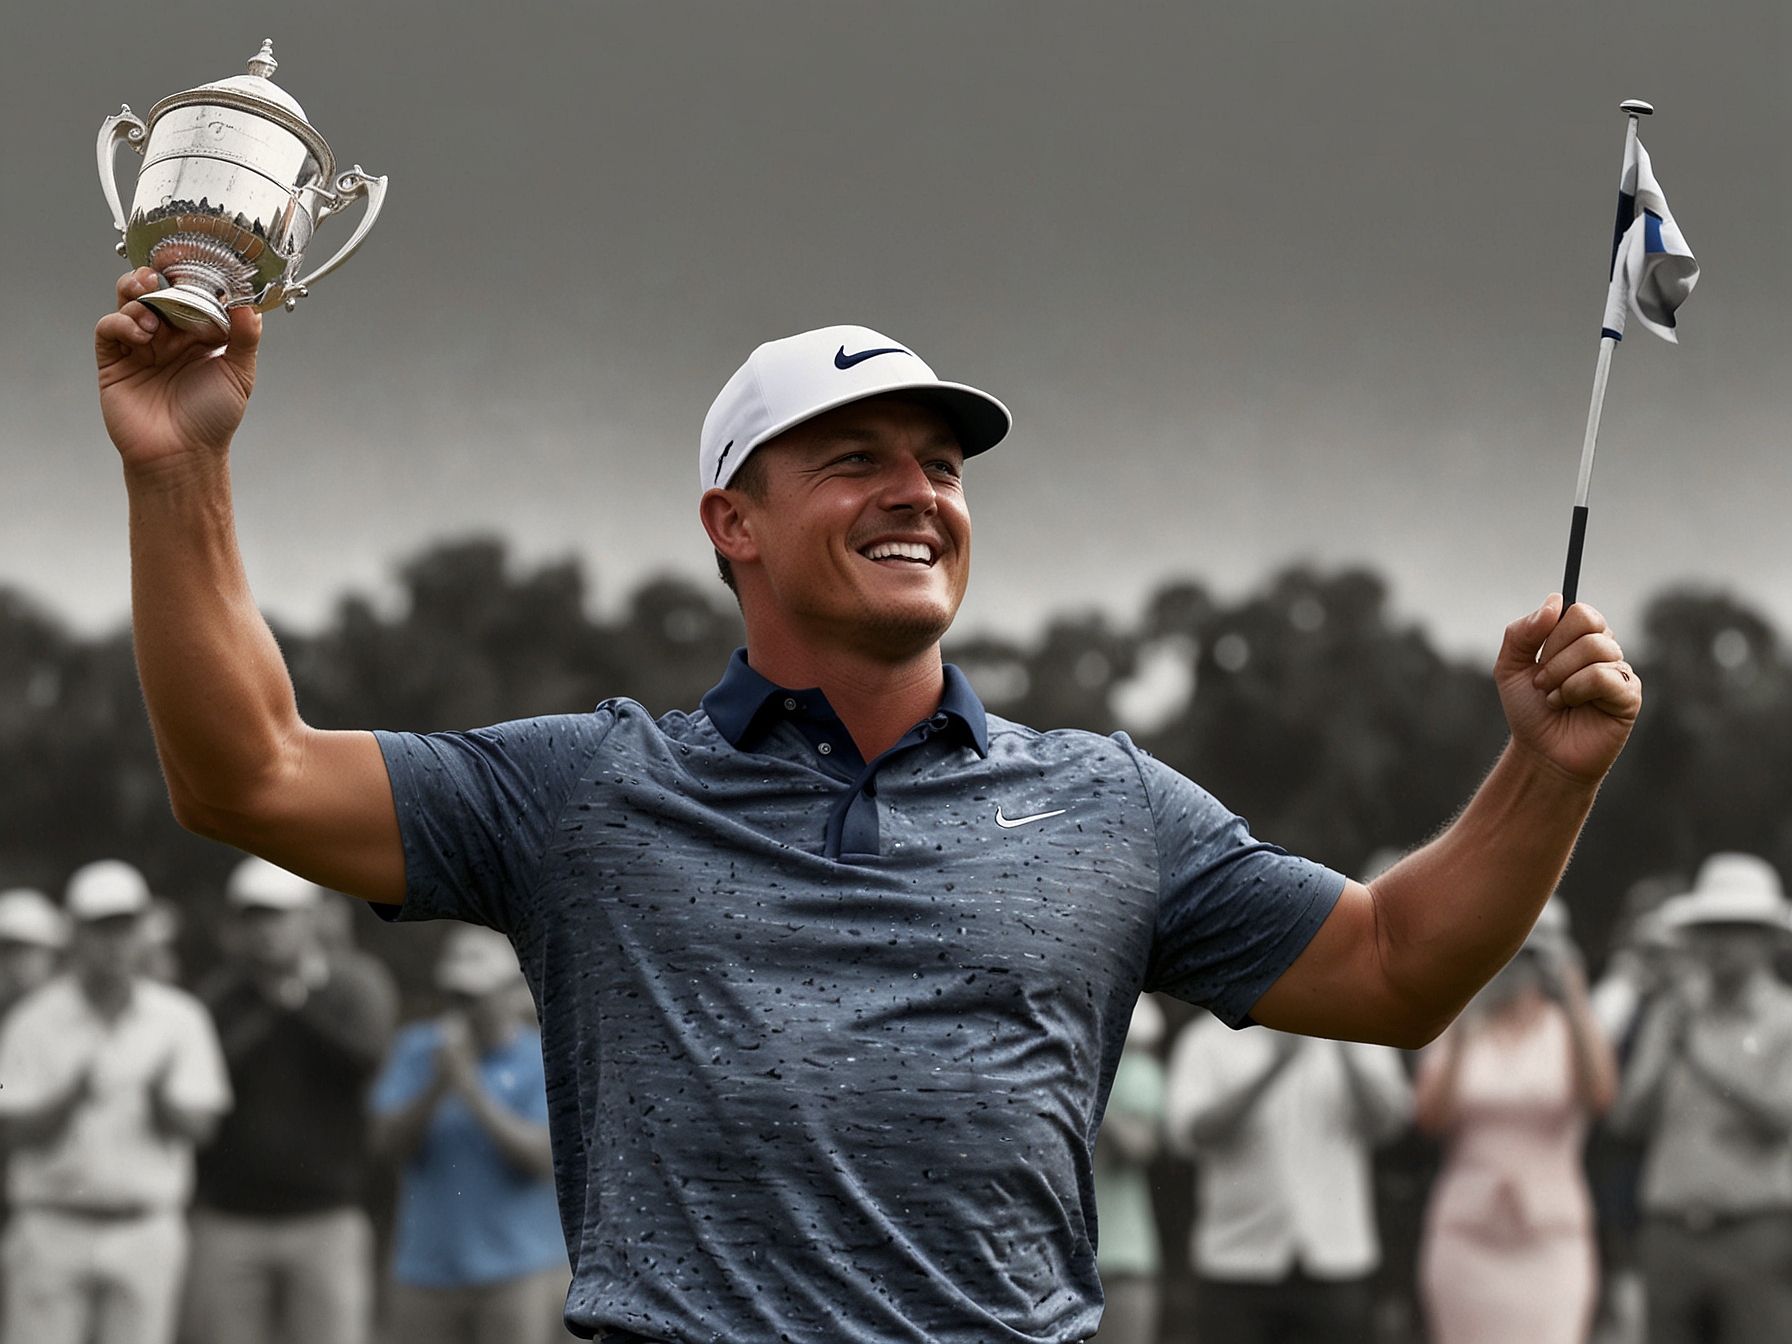 Bryson DeChambeau celebrating his victory at the U.S. Open, showcasing his steady focus and calm demeanor that led to his triumph amid McIlroy's missed opportunities.